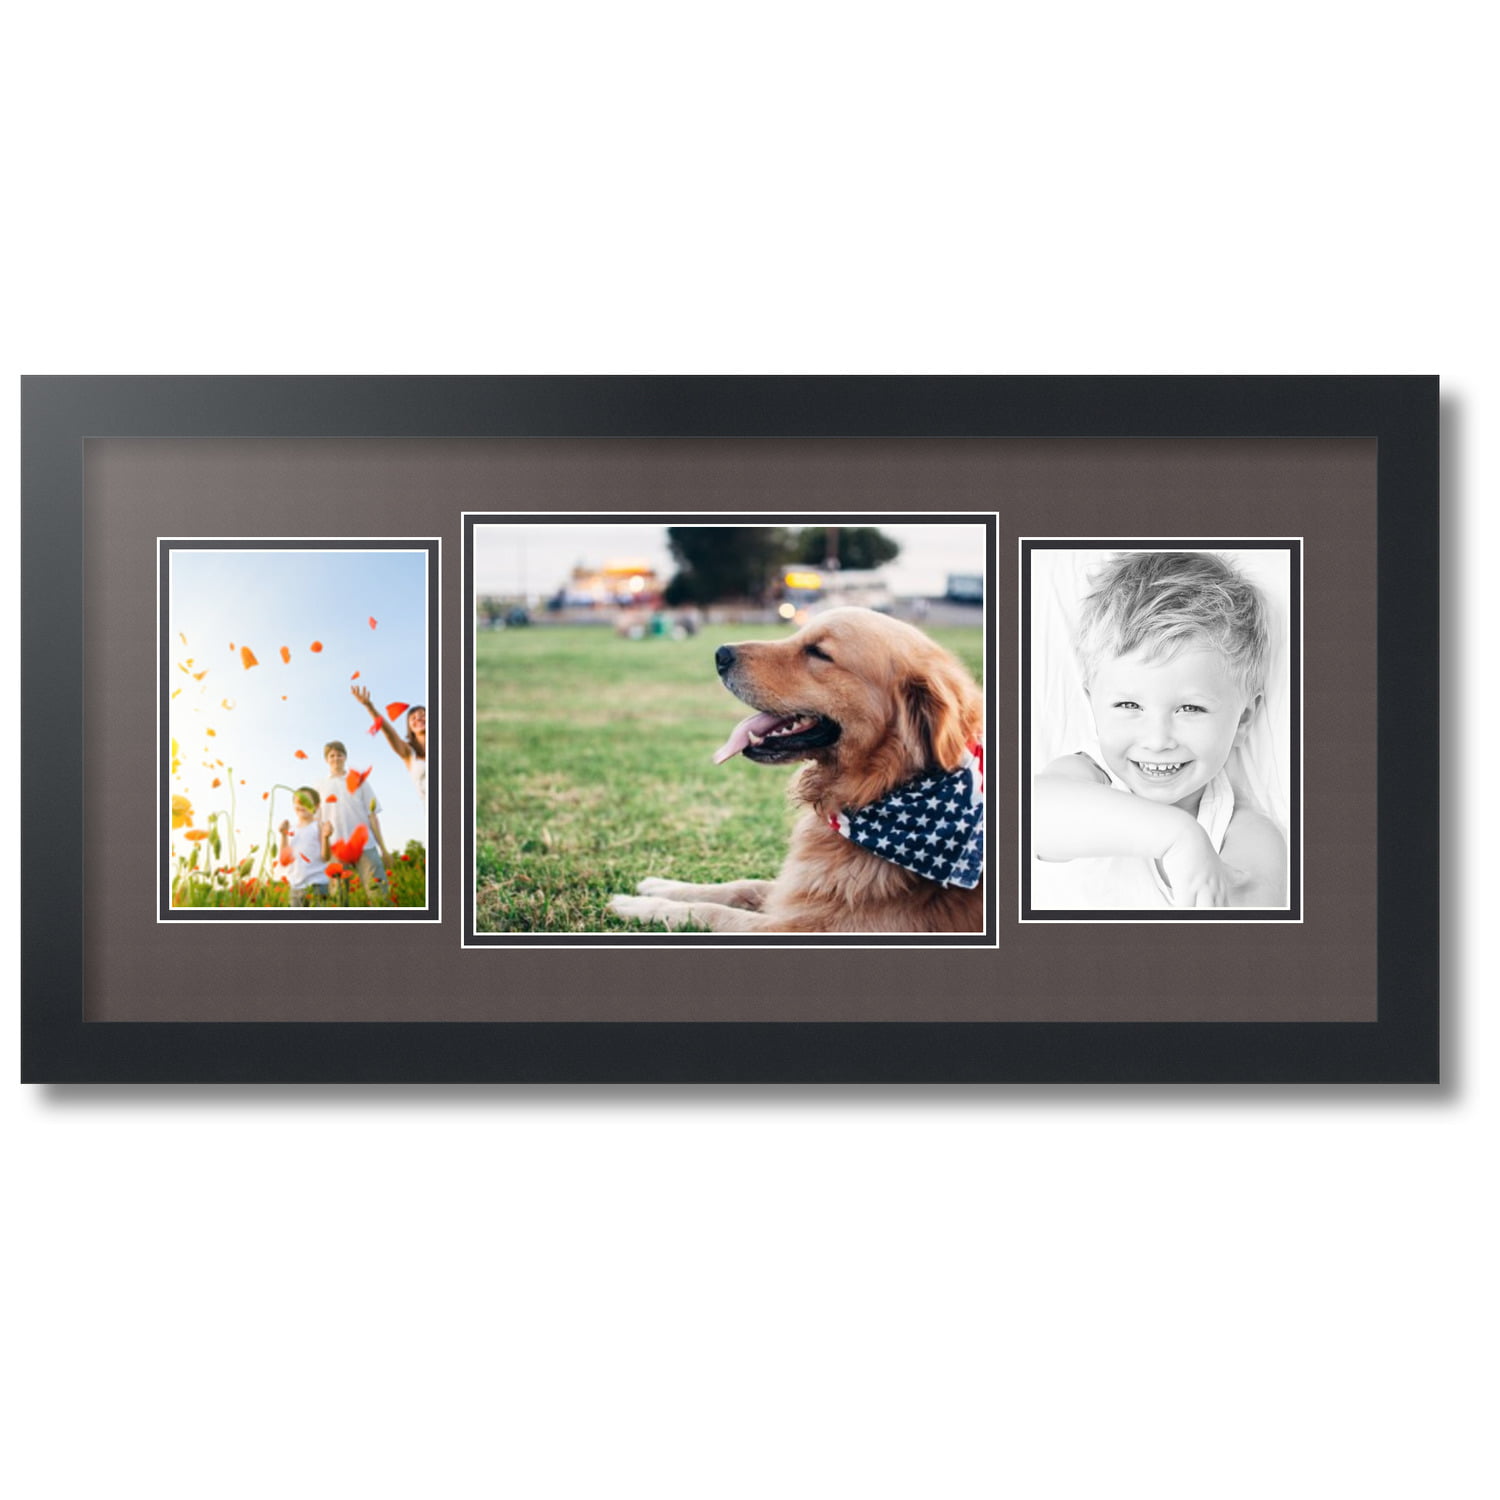 ArtToFrames Collage Photo Frame Double Mat with 1-20x30 Openings and Satin Black Frame